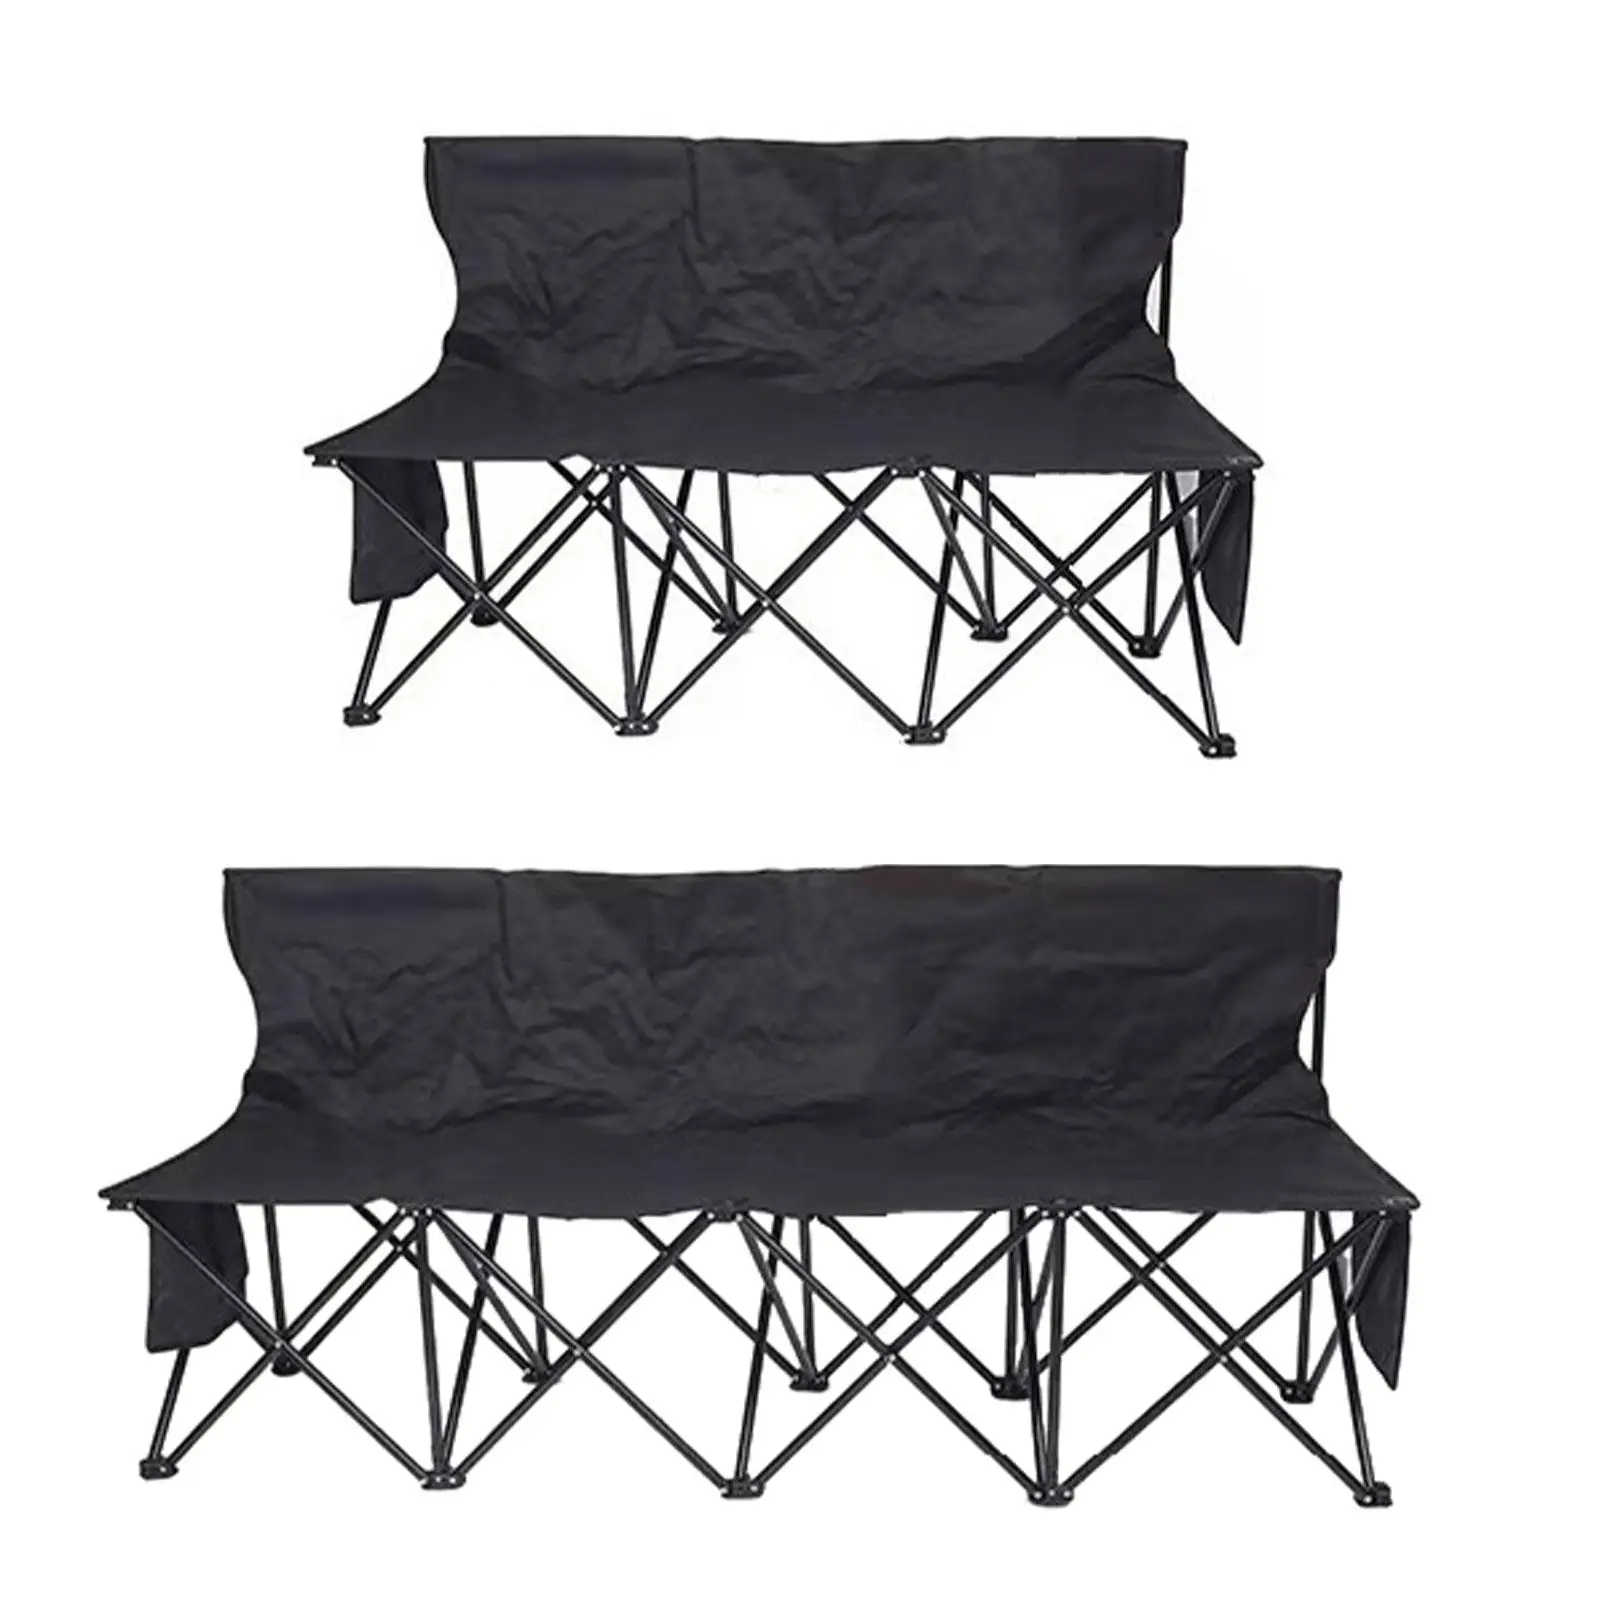 Folding Bench Chair Lightweight for Adults with Back Support Foldable Sideline Bench for Events Campsites Camping Beach Backyard